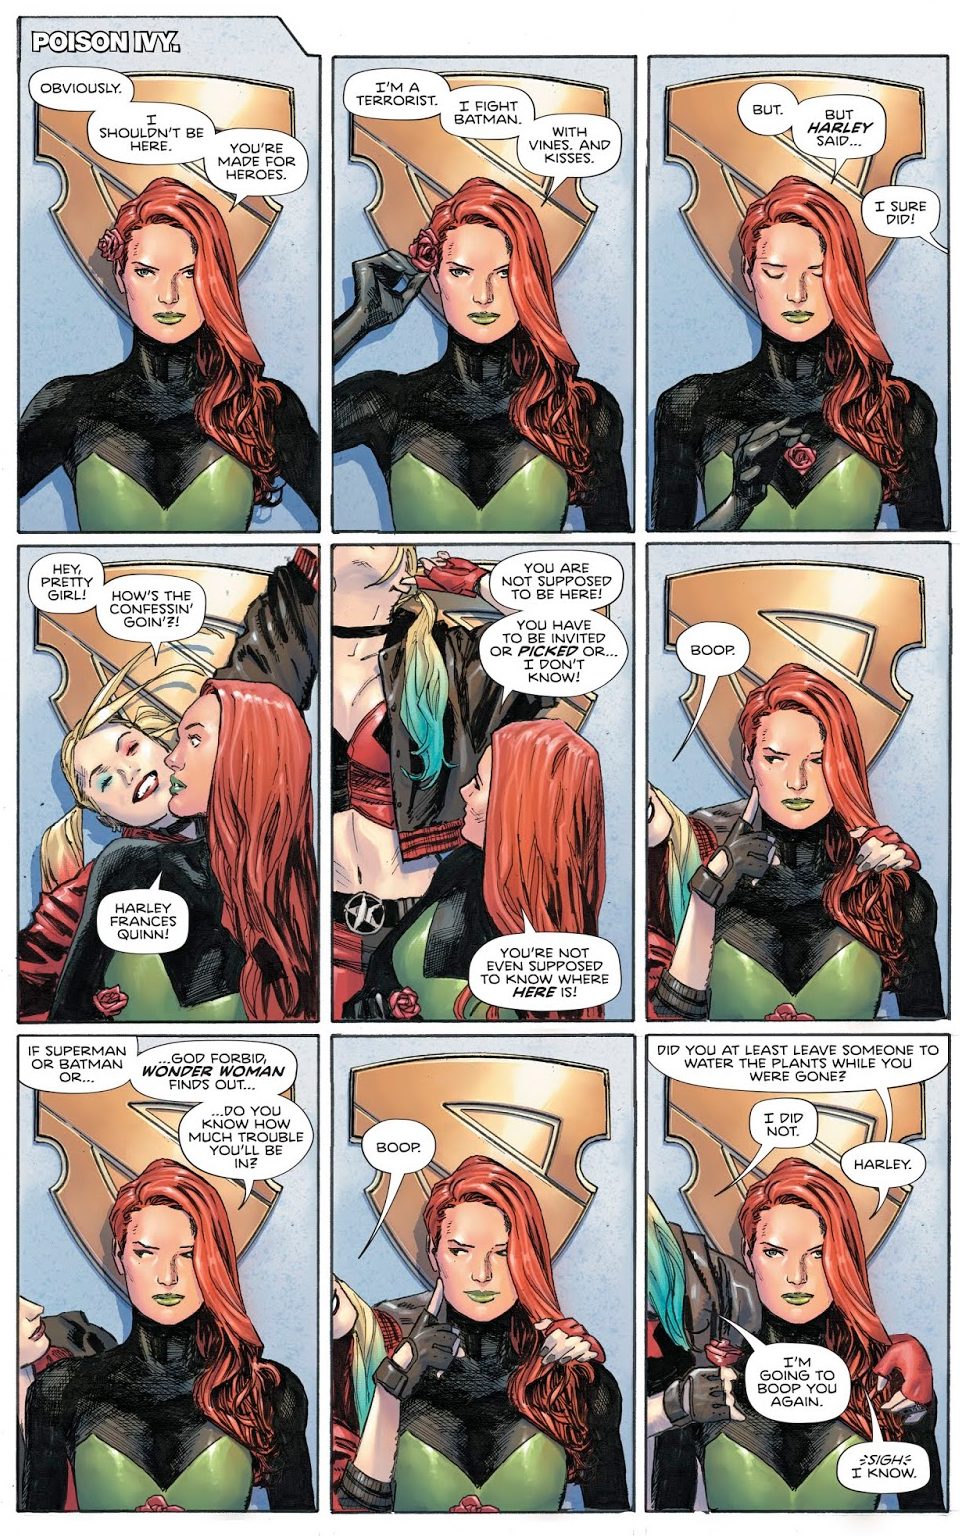 Harley Quinn And Poison Ivy (Heroes In Crisis)